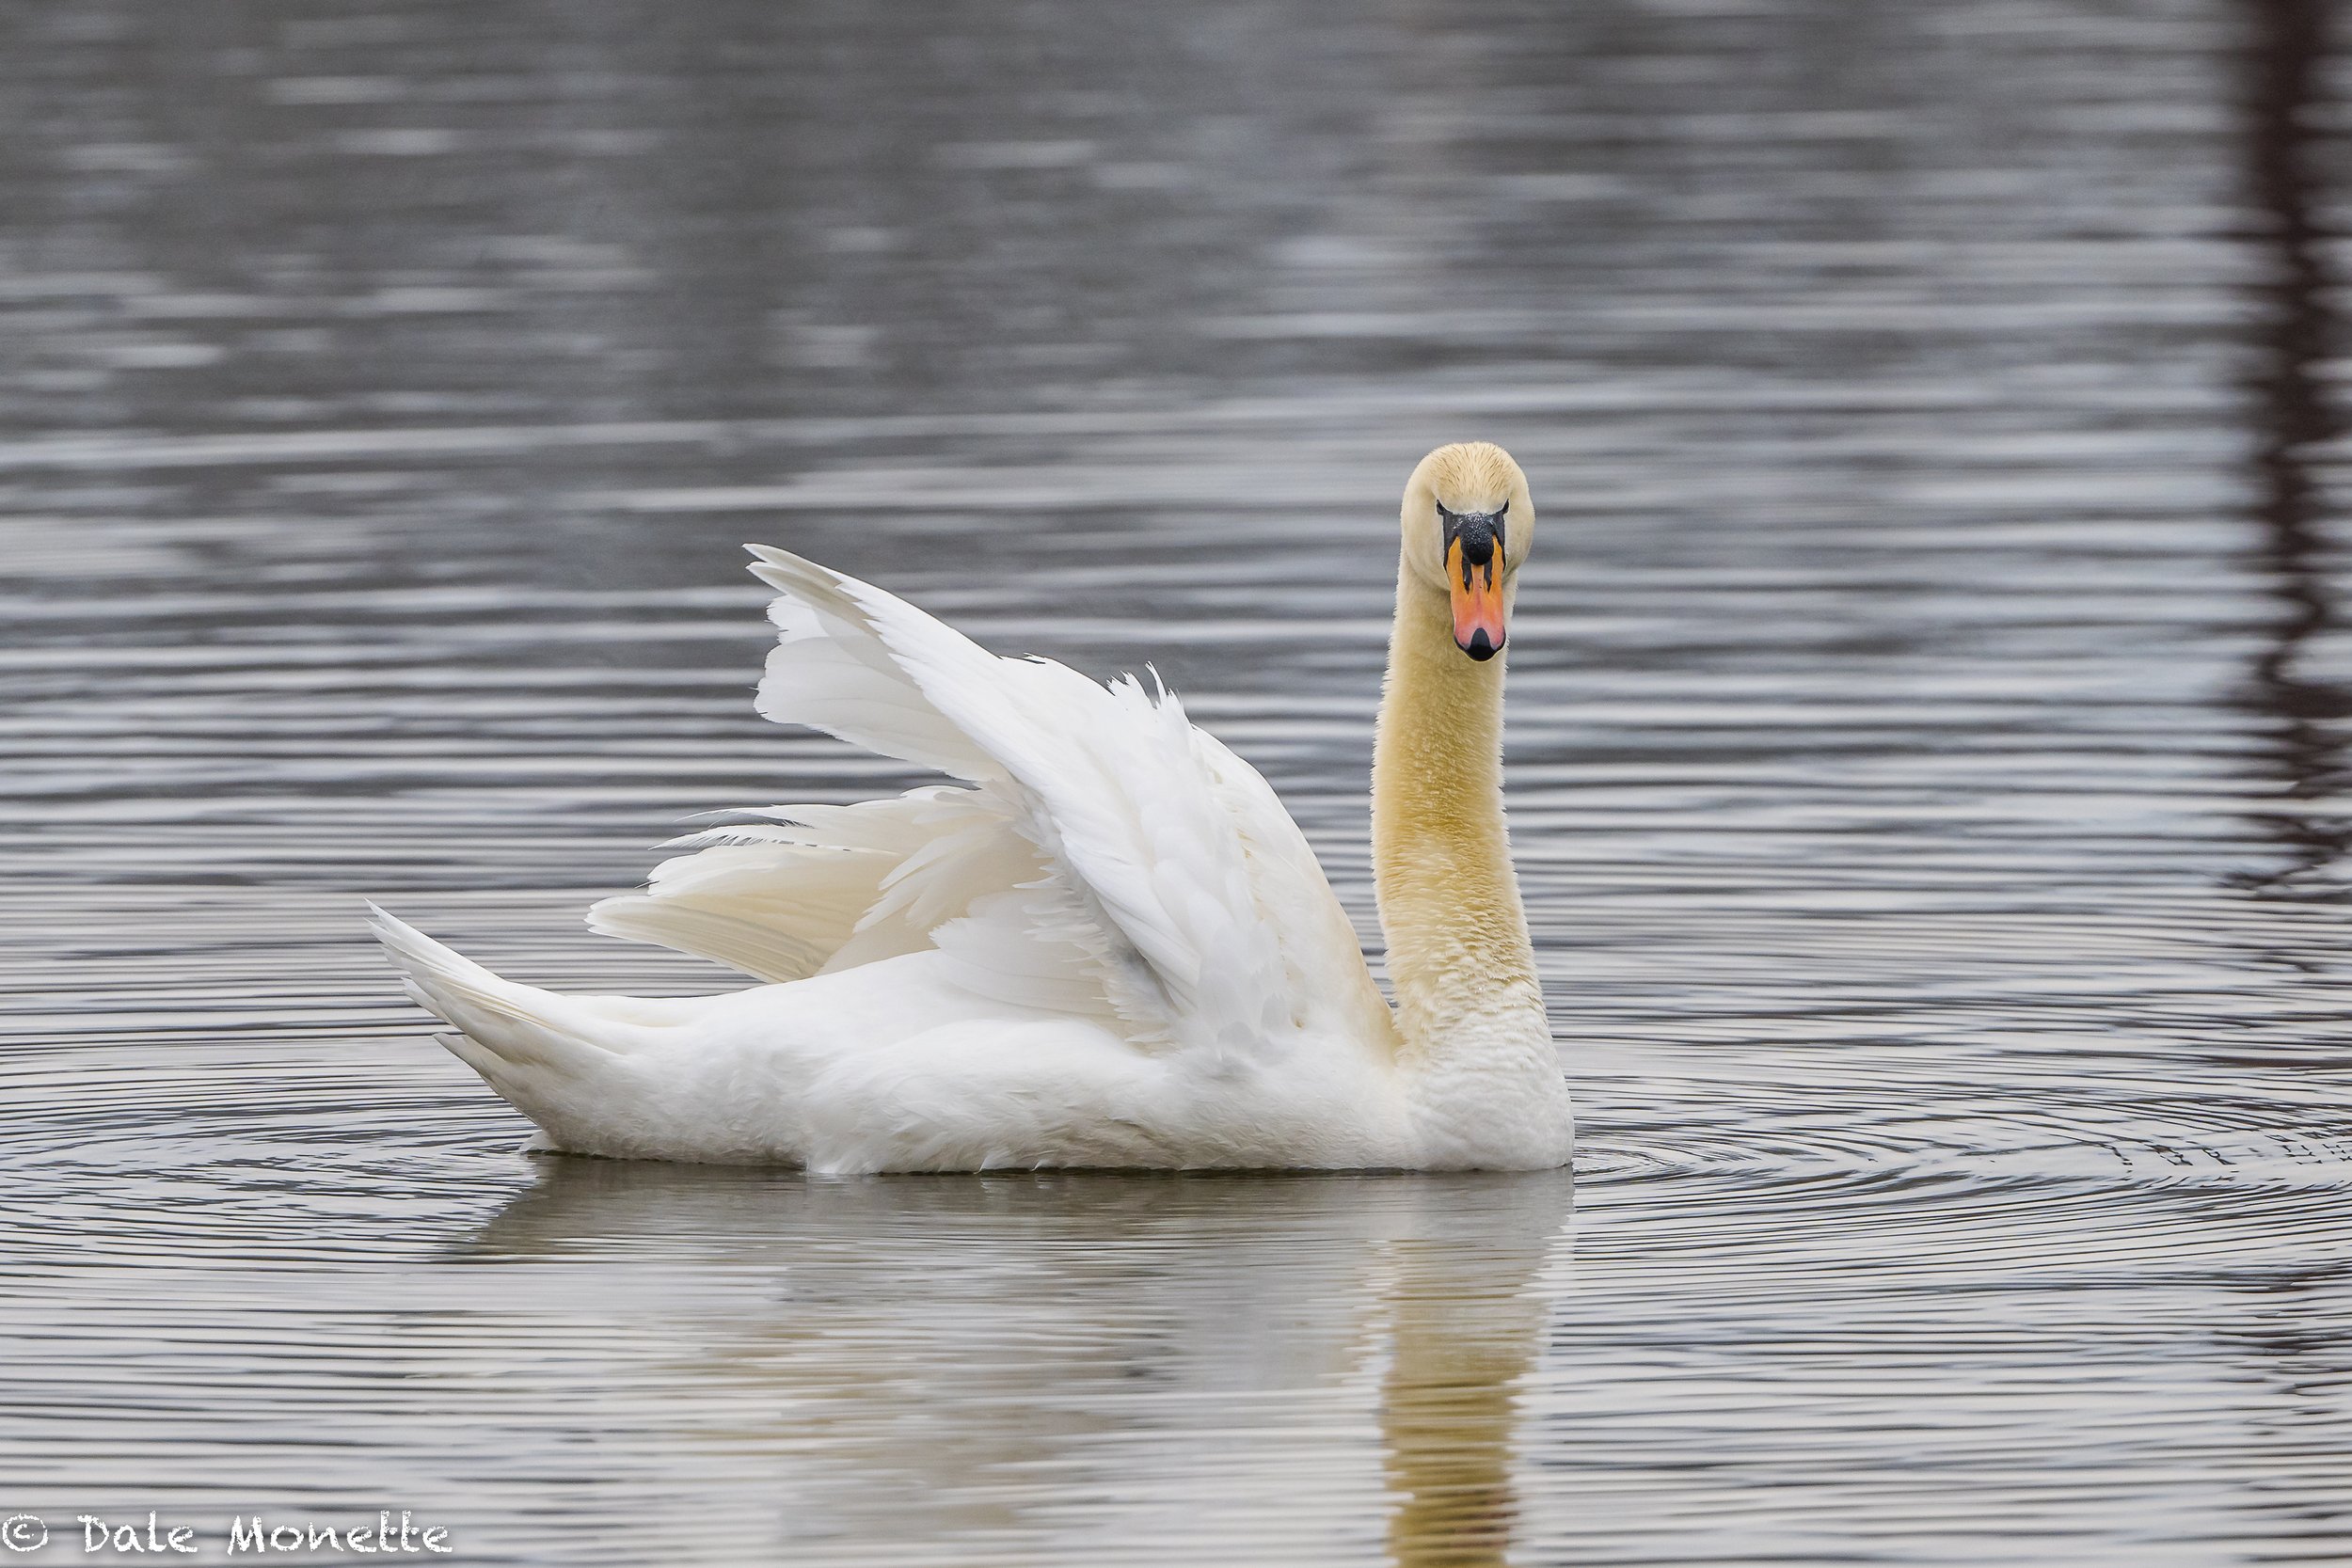   I felt the evil stare from this mute swan from 100 yards away!    